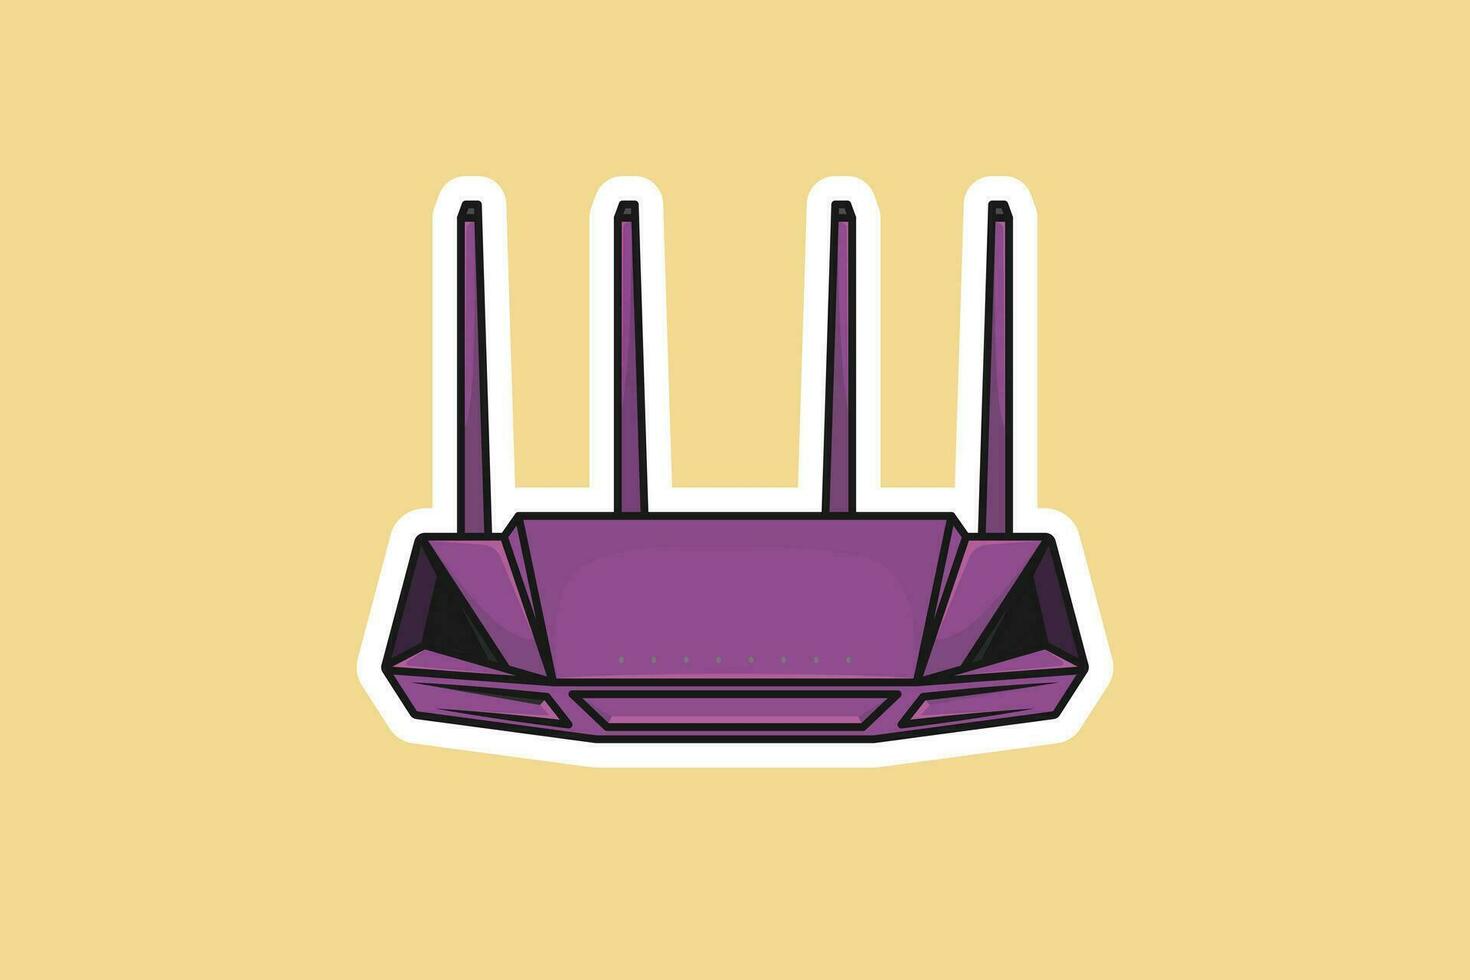 Modem Internet Router Sticker Technology Device vector illustration. Technology object icon concept. Wireless network router device sticker vector design with shadow.